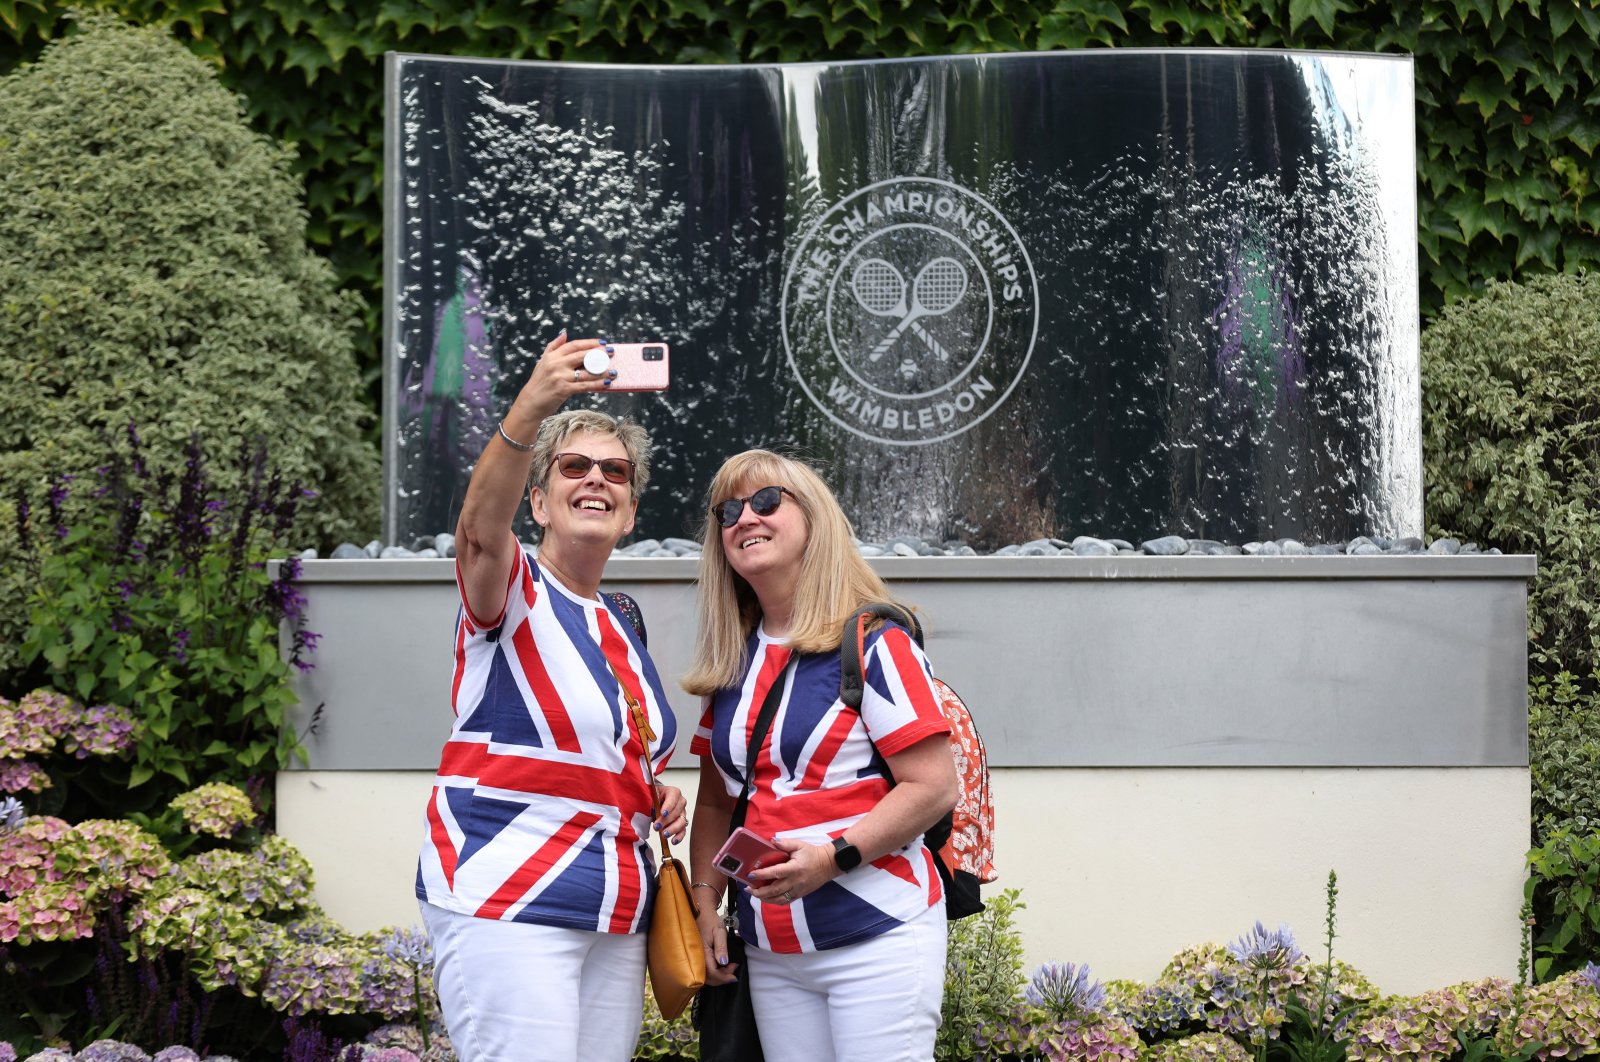 Spectators pose for a selfie before the start of play at the Wimbledon, London, England, June 27, 2022. (Reuters Photo)